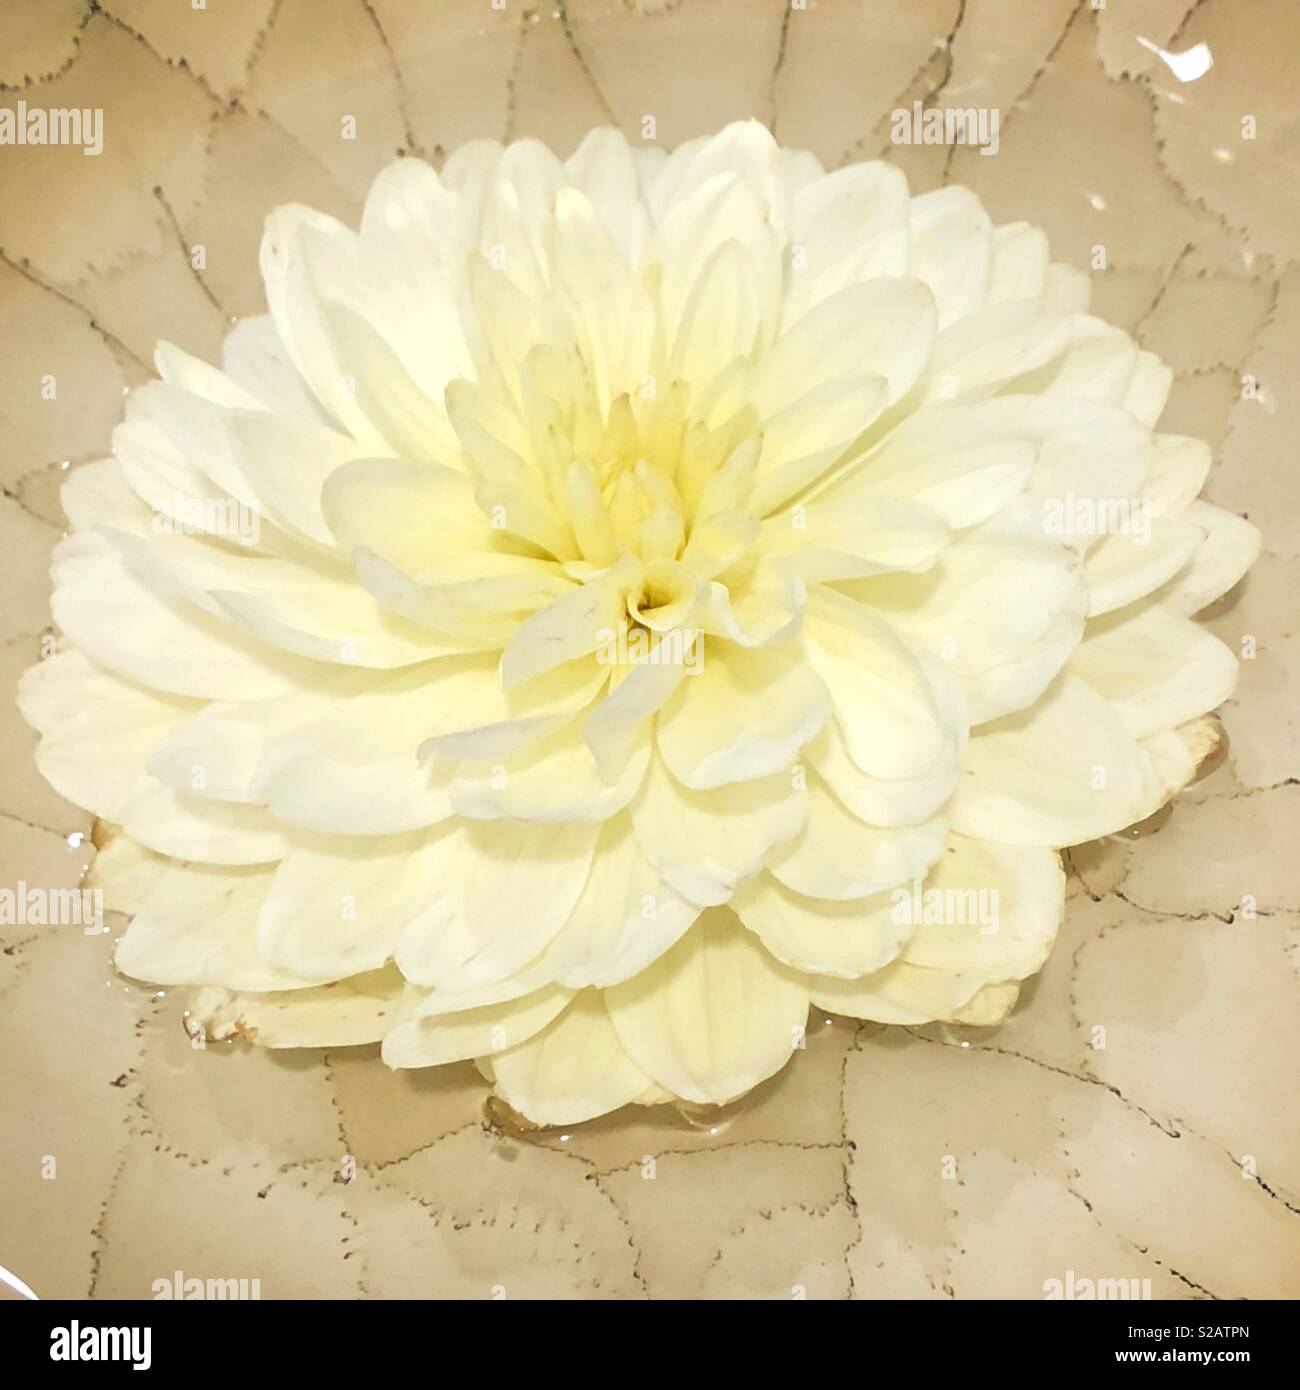 A dahlia flower in a bowl of water. Stock Photo